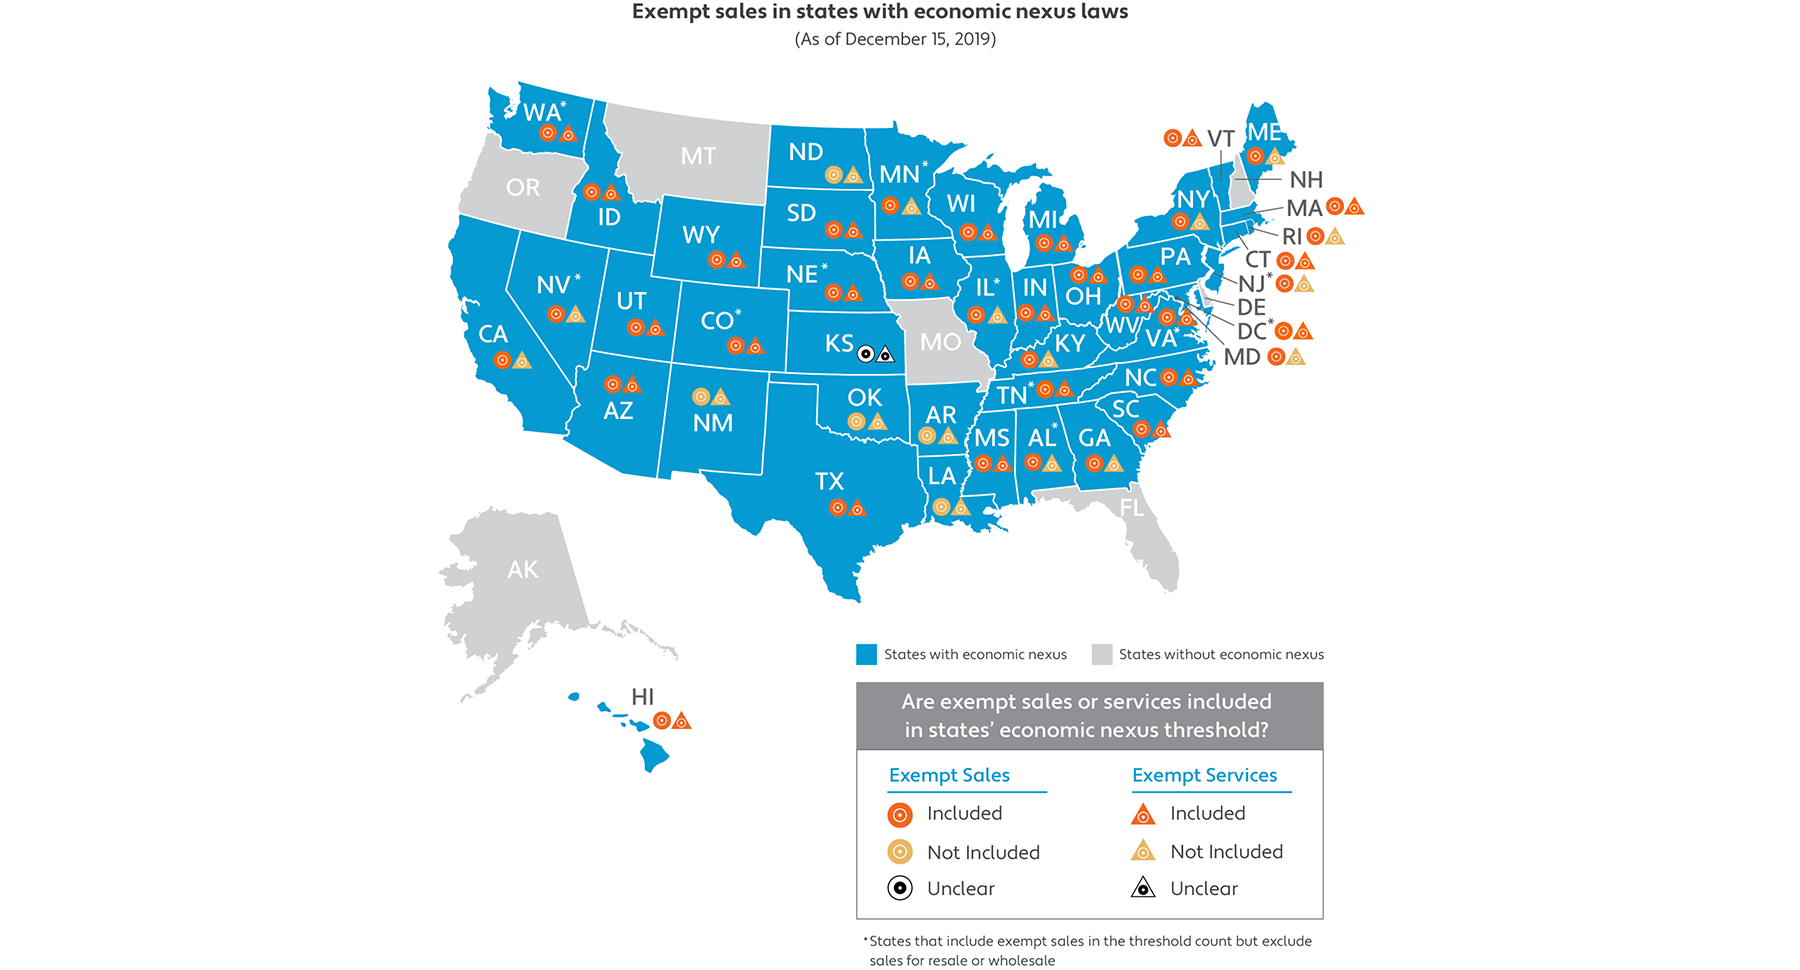 US Map of Exempt Sales in States with Economic Nexus Laws